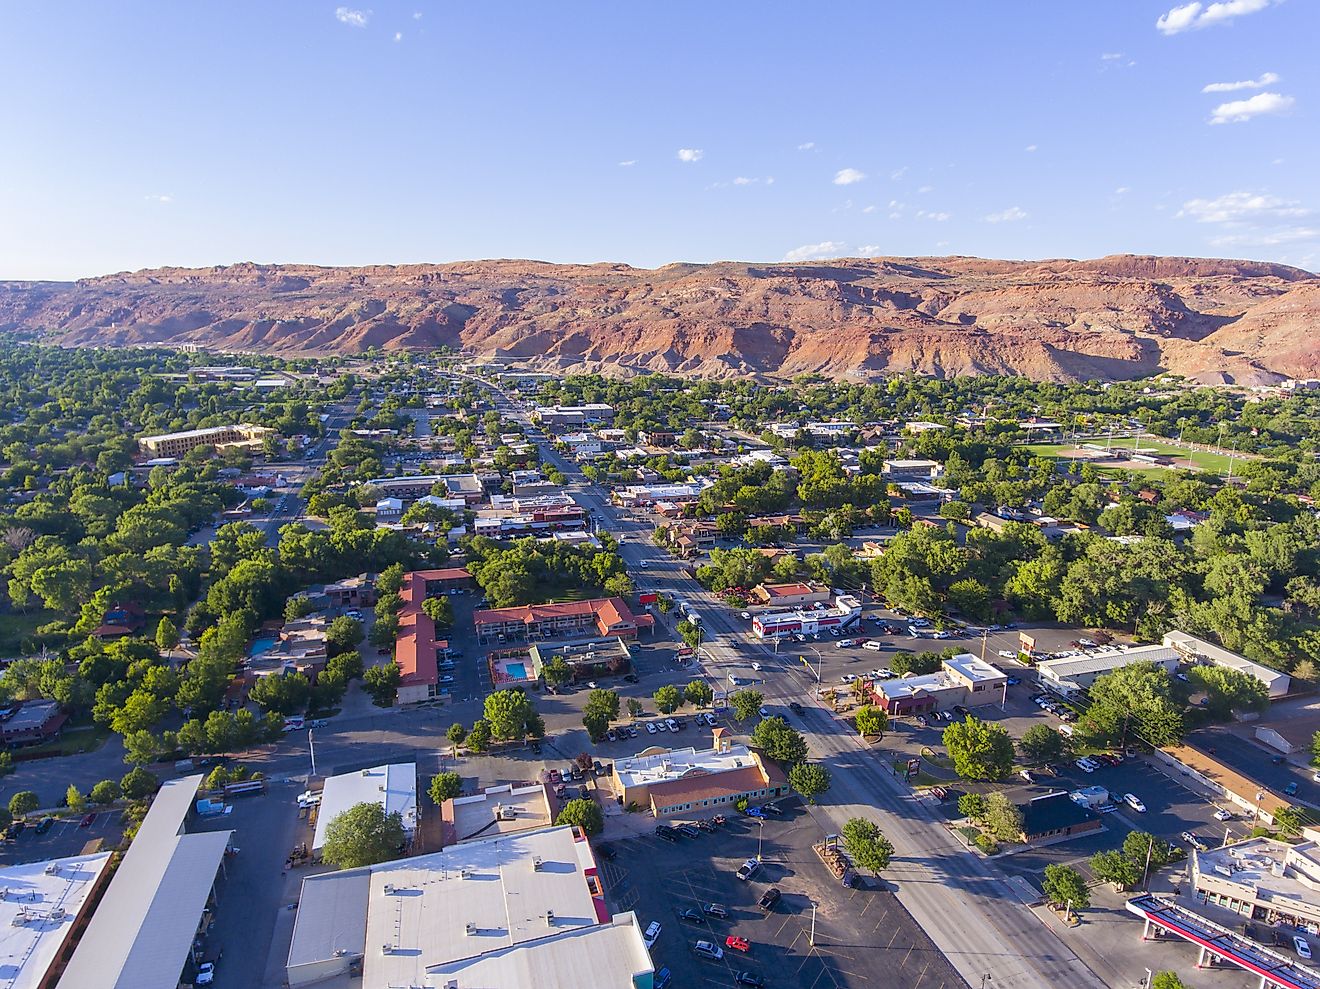 Aerial view of Moab city center and historic buildings during the summer in Utah, USA.